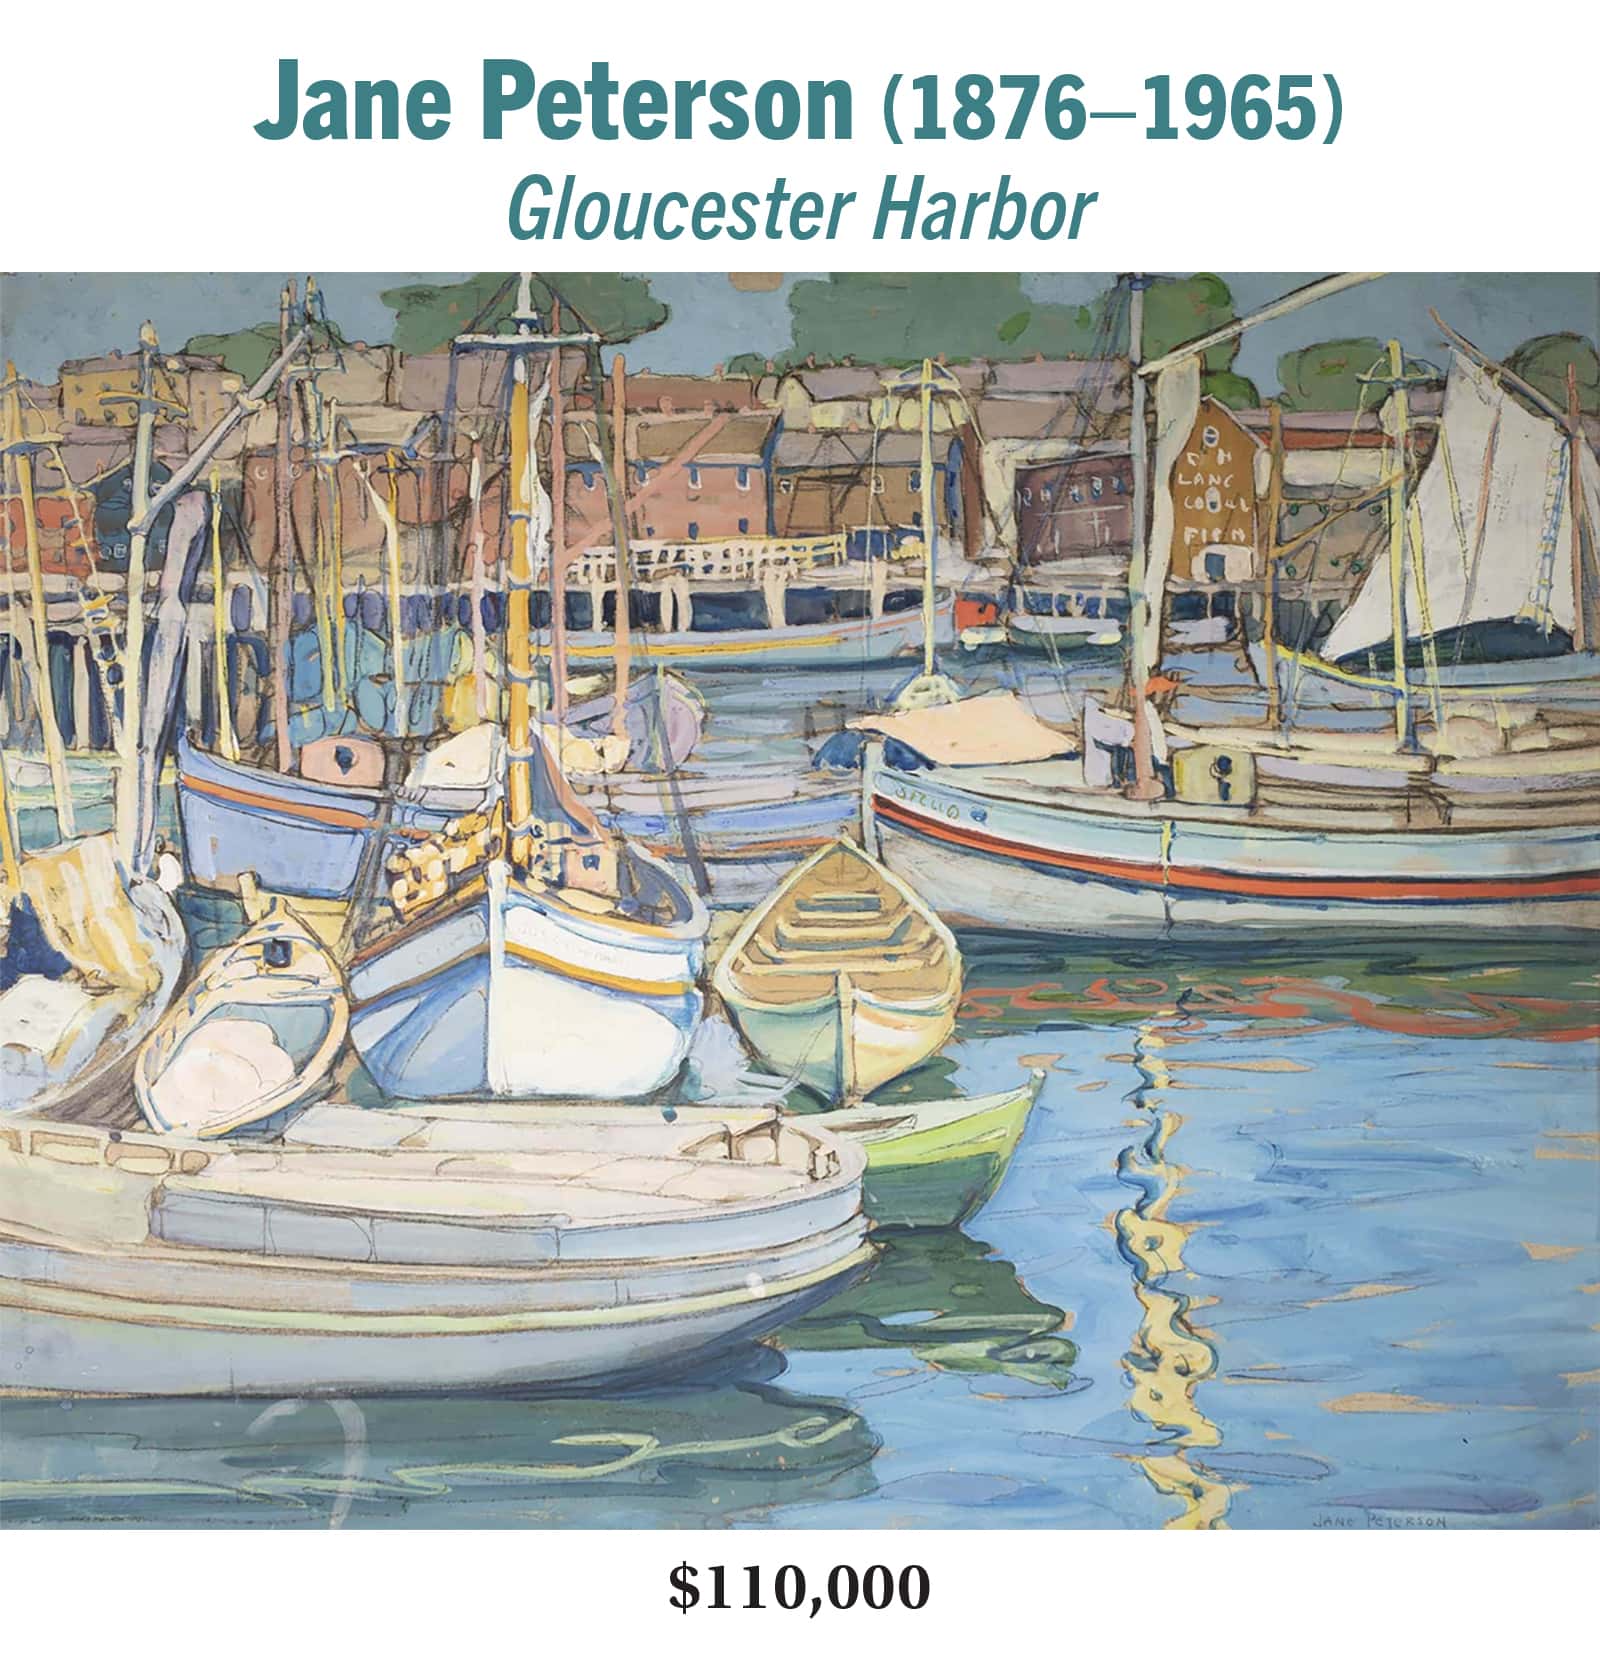 Jane Peterson 18761965 Gloucester Harbor Gouache and charcoal on paper American impressionist harbor painting